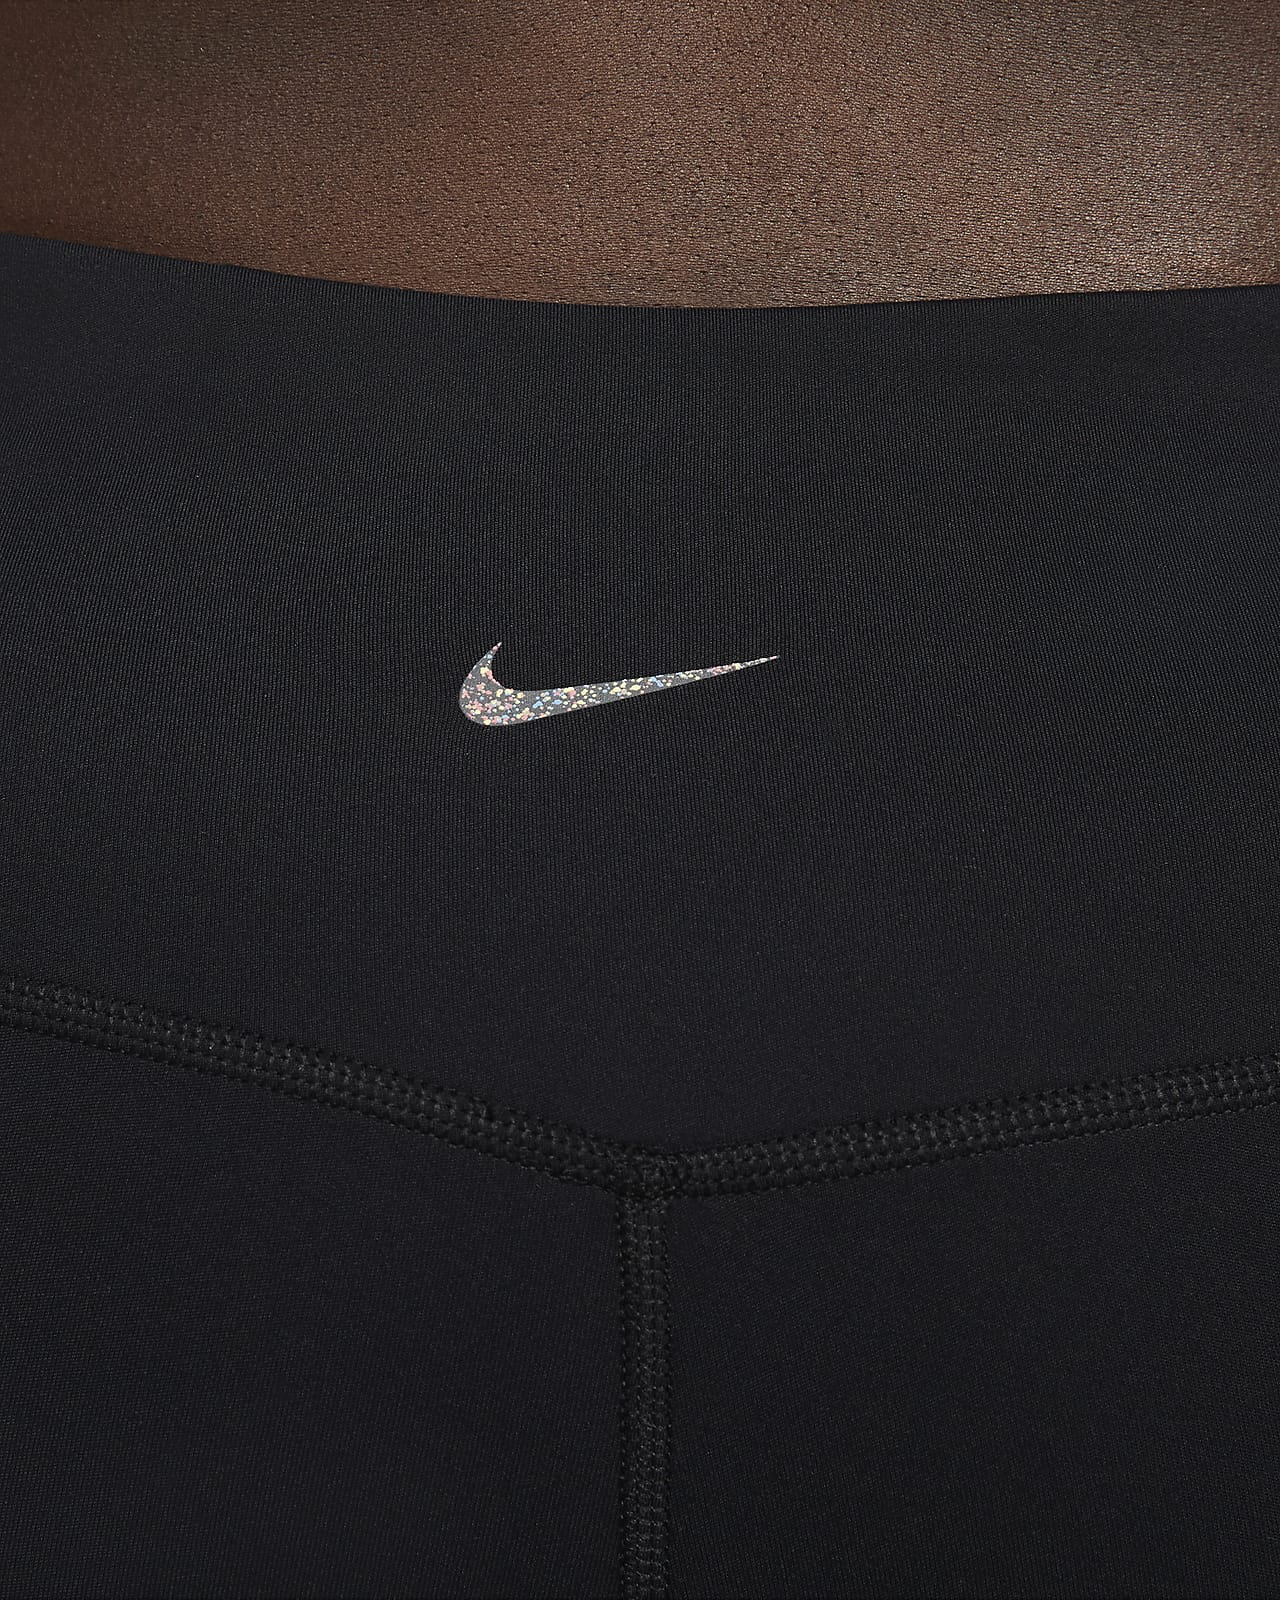 Nike Pro Women's High-Waisted 7/8 Training Leggings With, 51% OFF